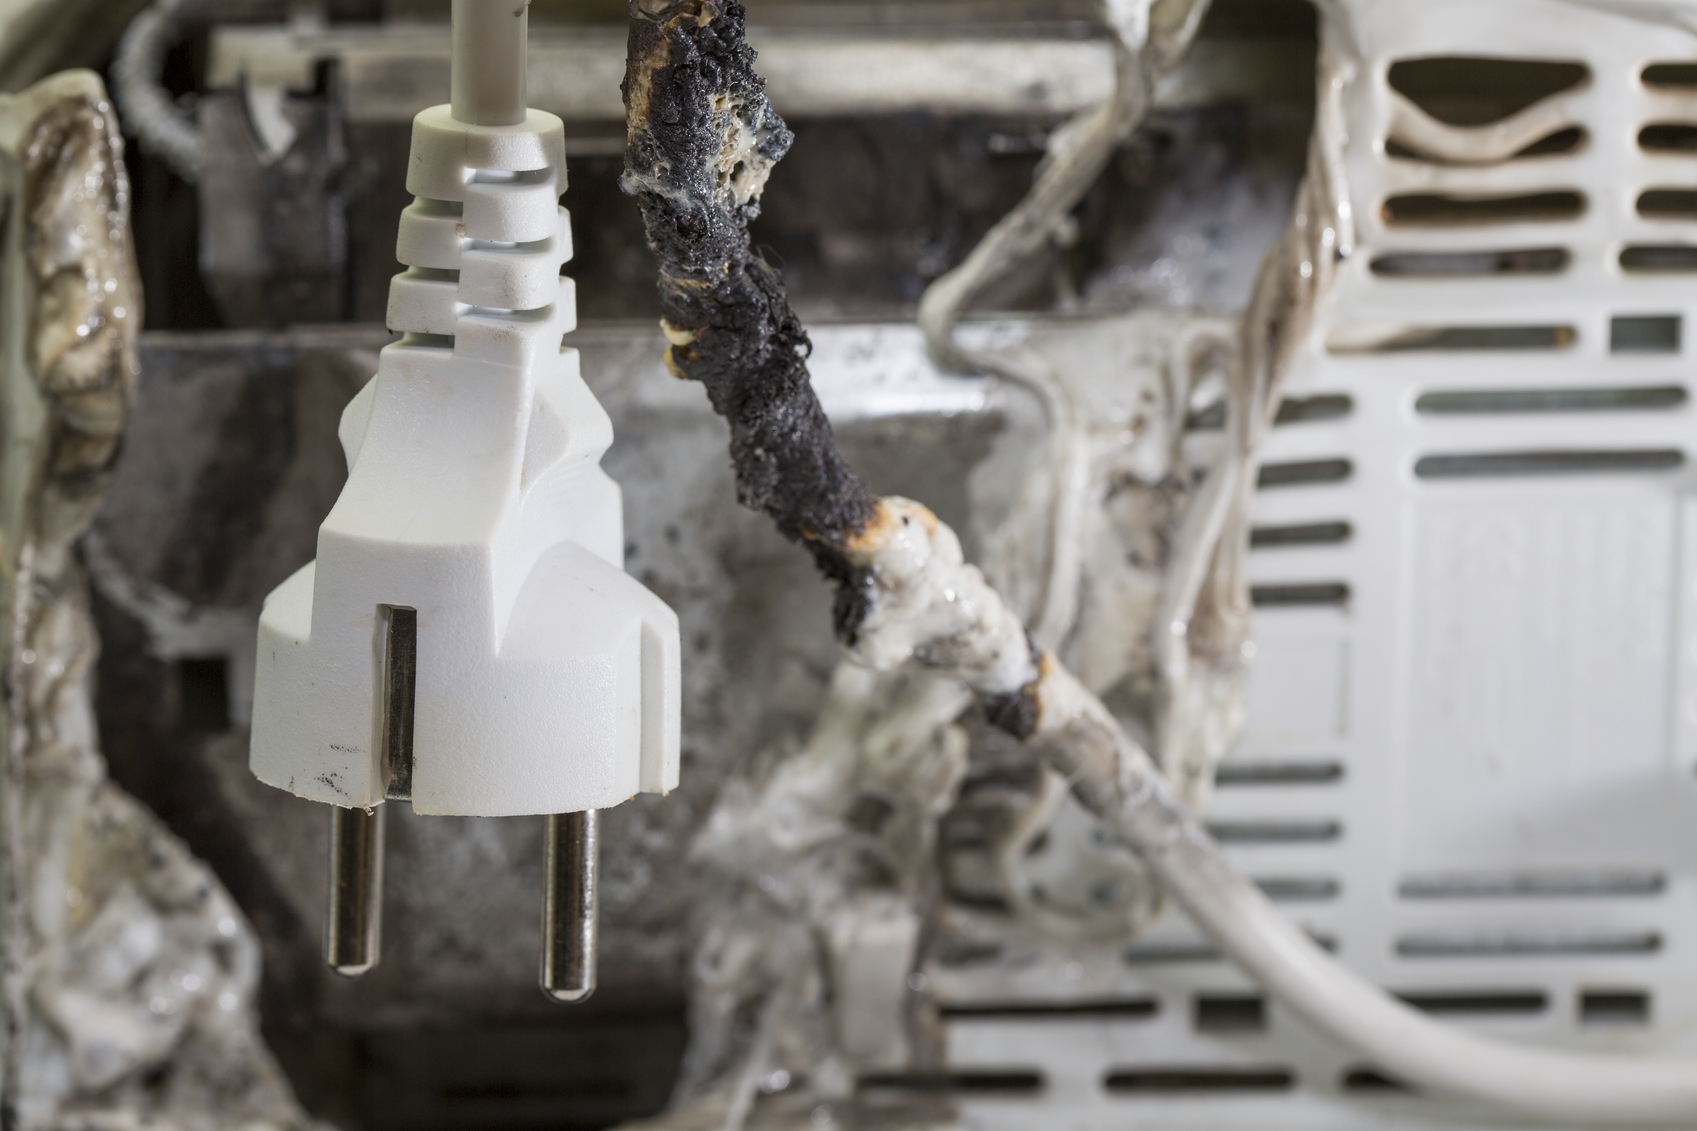 Closeup of burnt cable with burnt electrical appliance